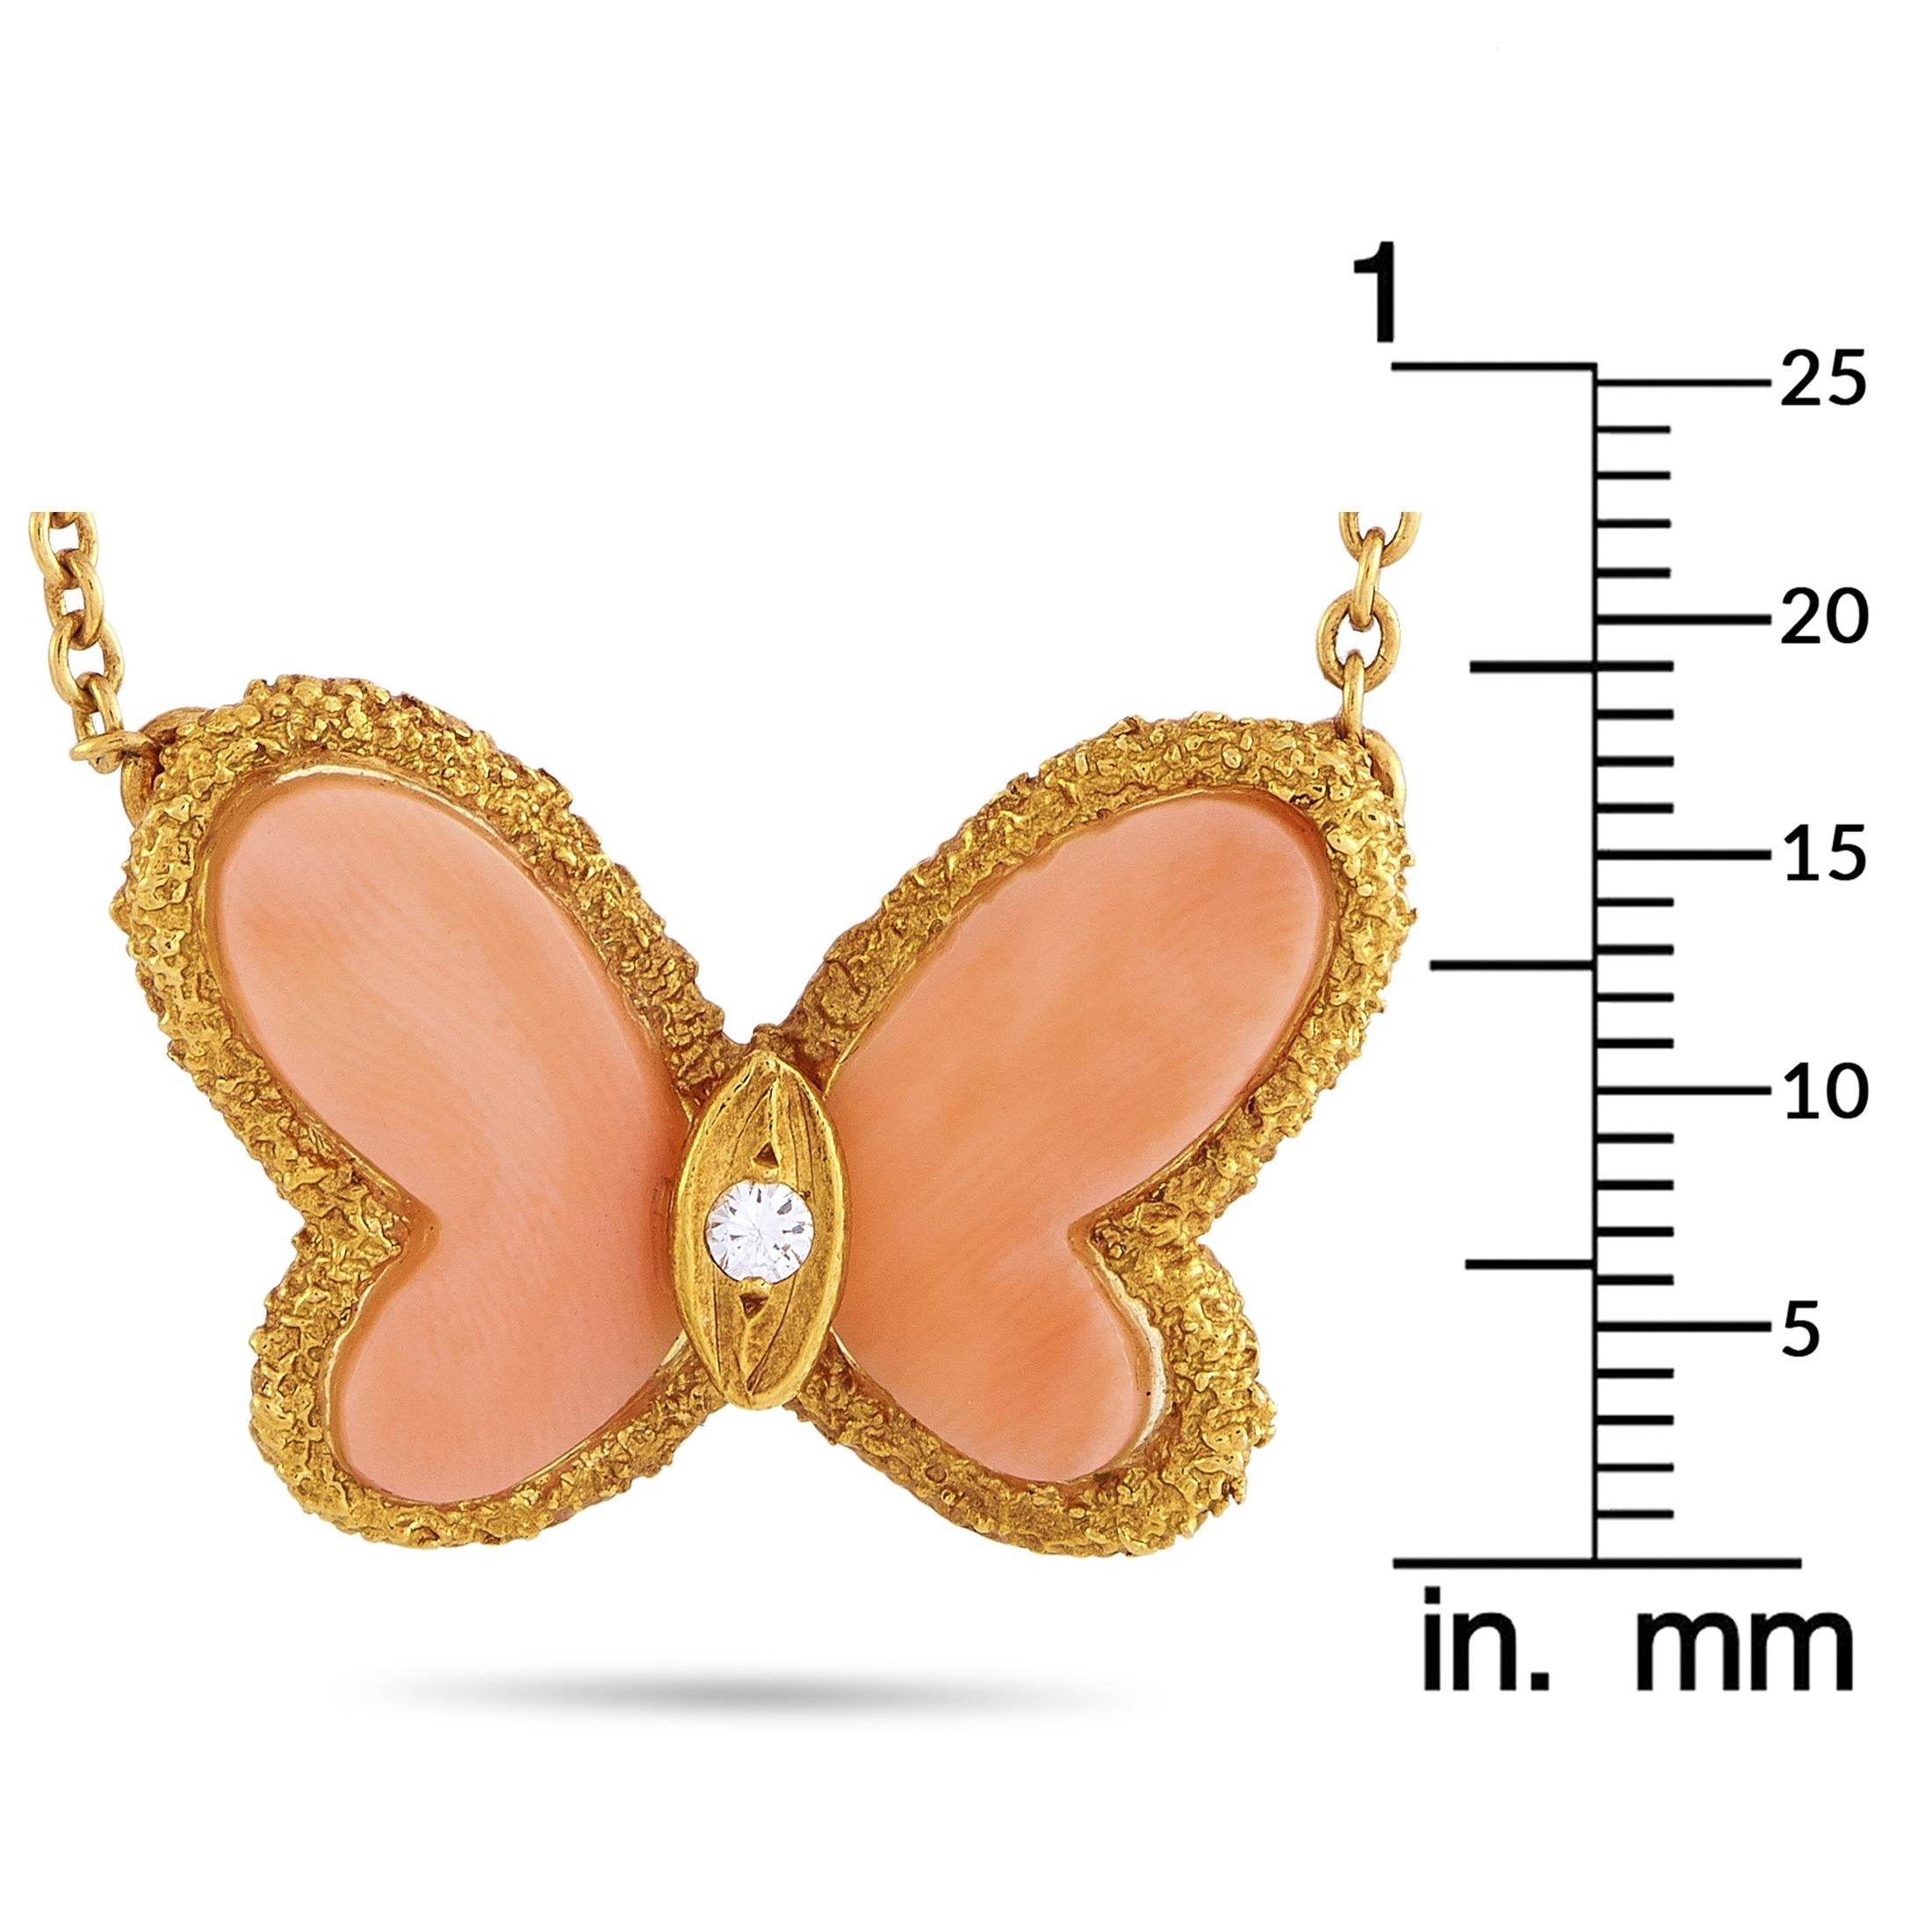 This vintage Van Cleef & Arpels necklace is made of 18K yellow gold and embellished with pink coral and a diamond stone. The necklace weighs 6.2 grams and is presented with a 16” chain and a butterfly pendant that measures 0.75” in length and 1” in